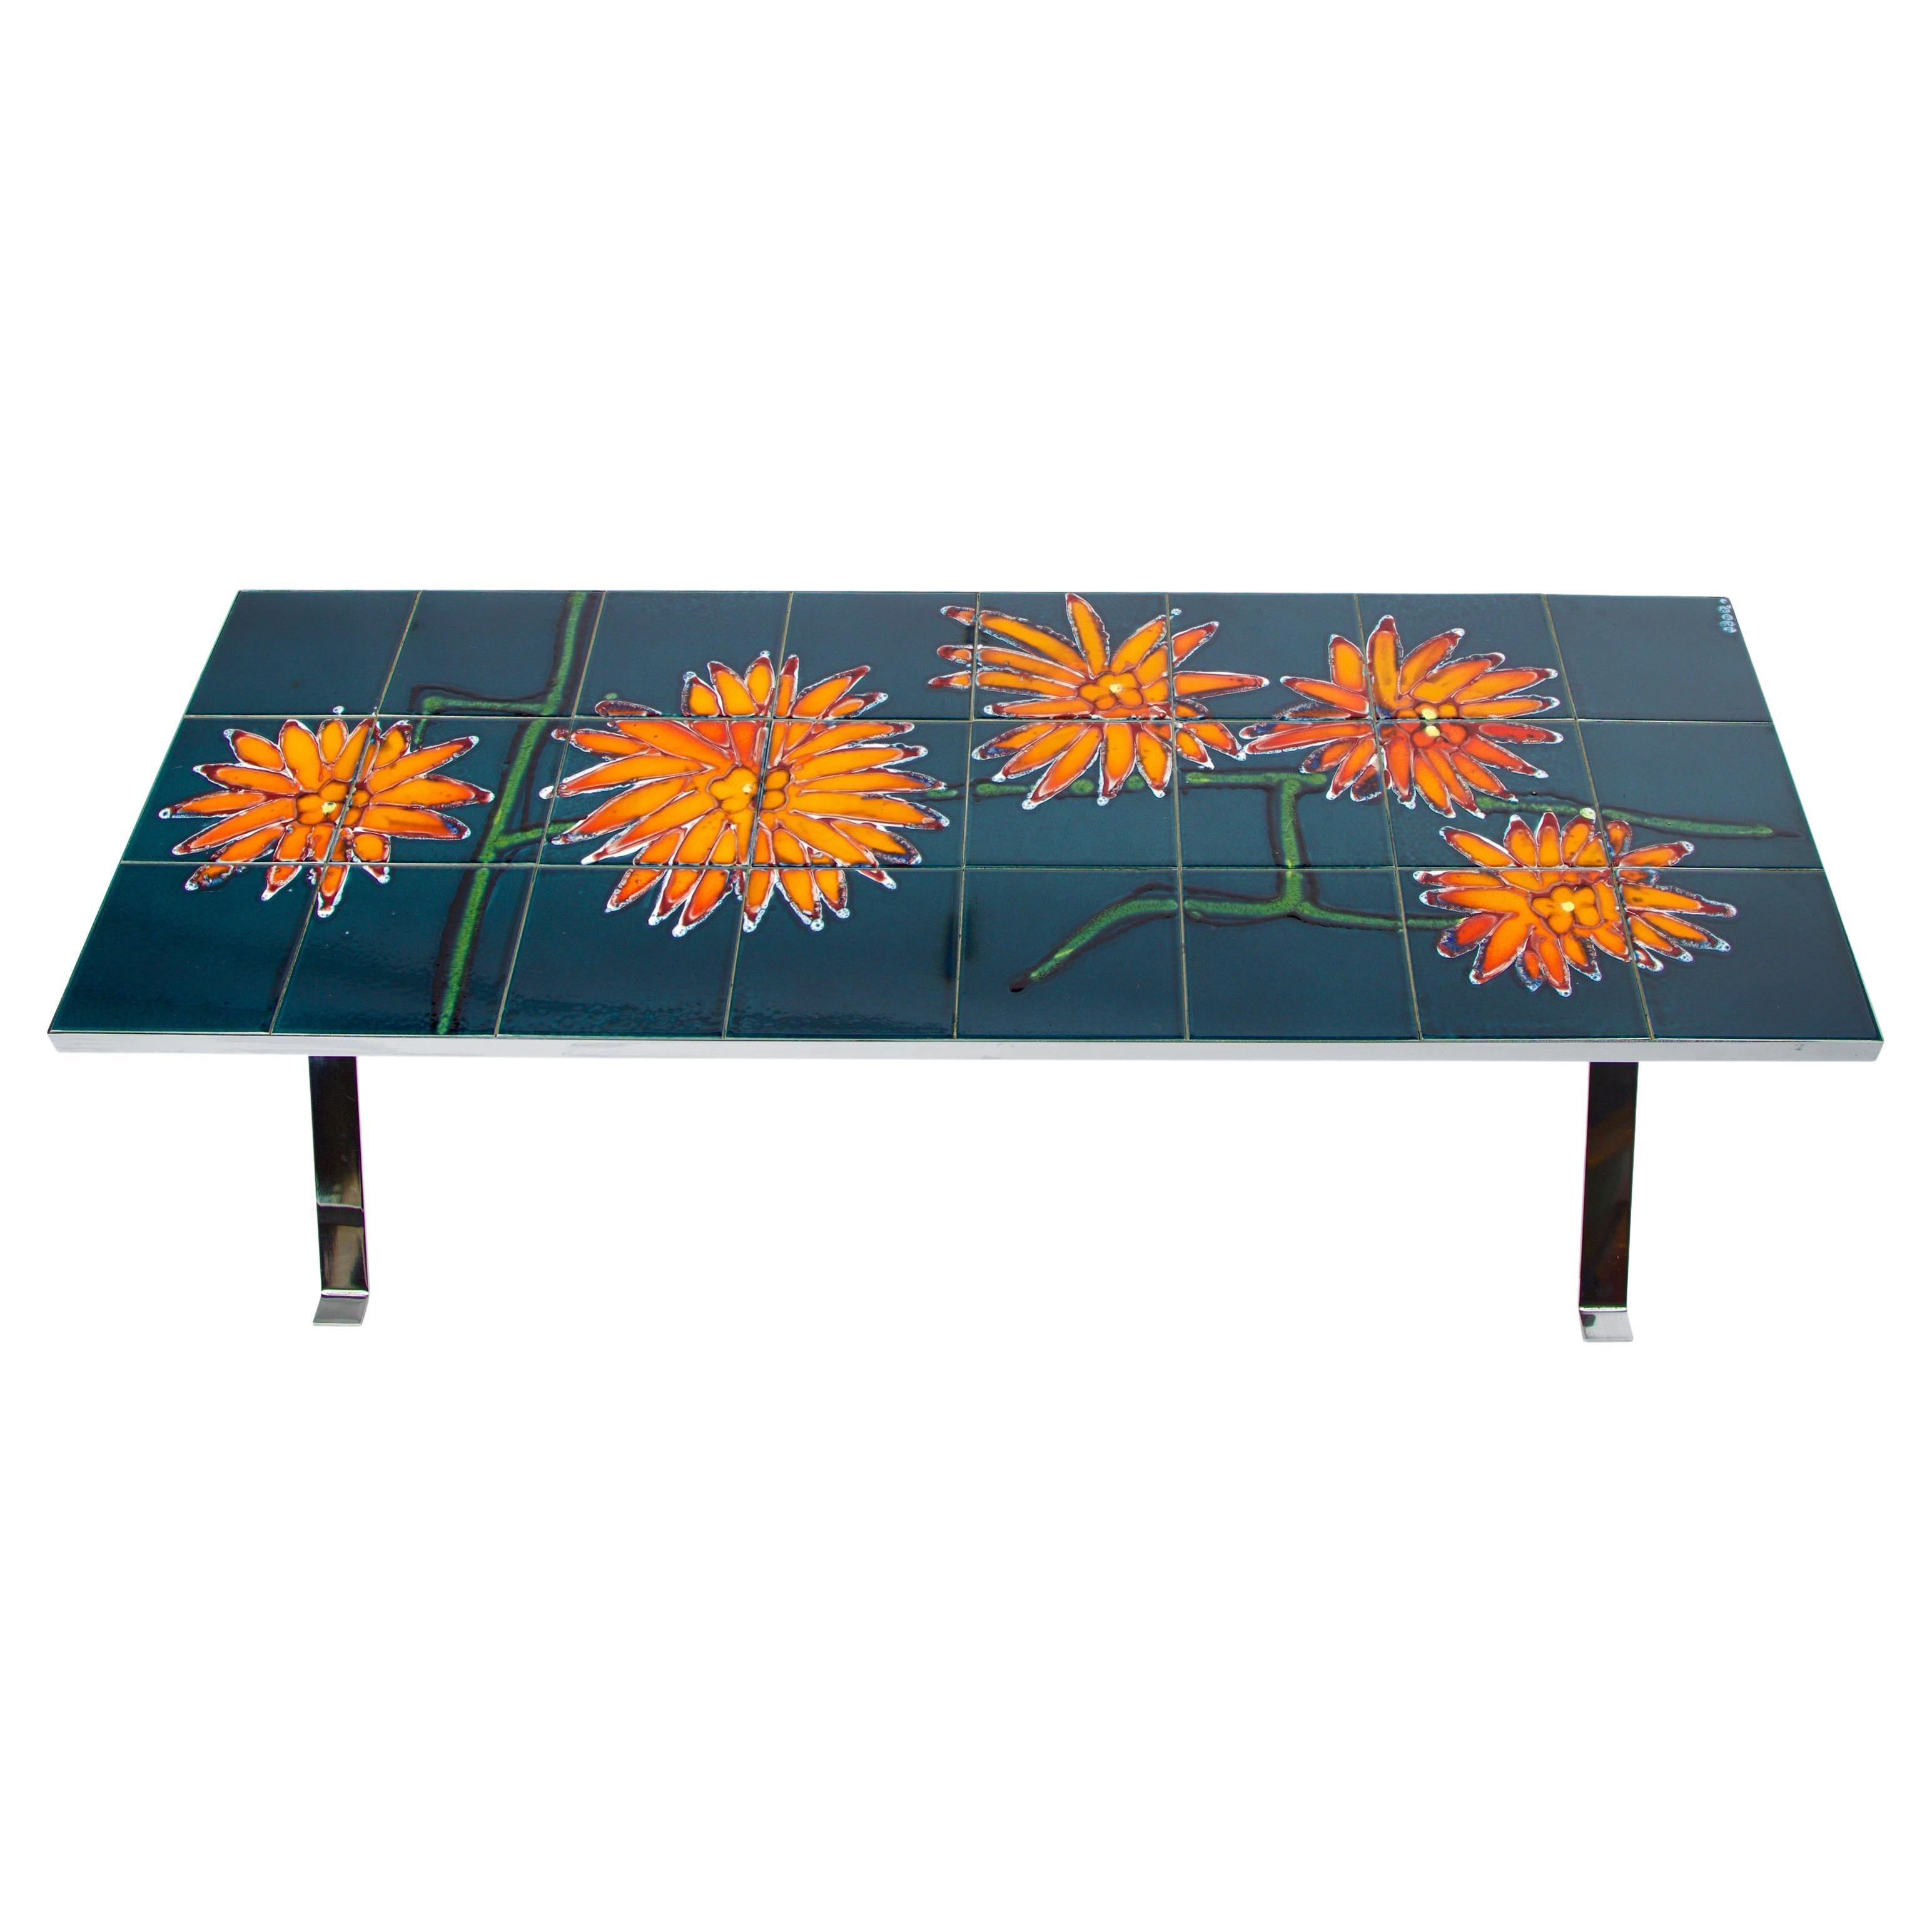 Mid-Century Modern Tile Top Coffee Table with Chrome Legs